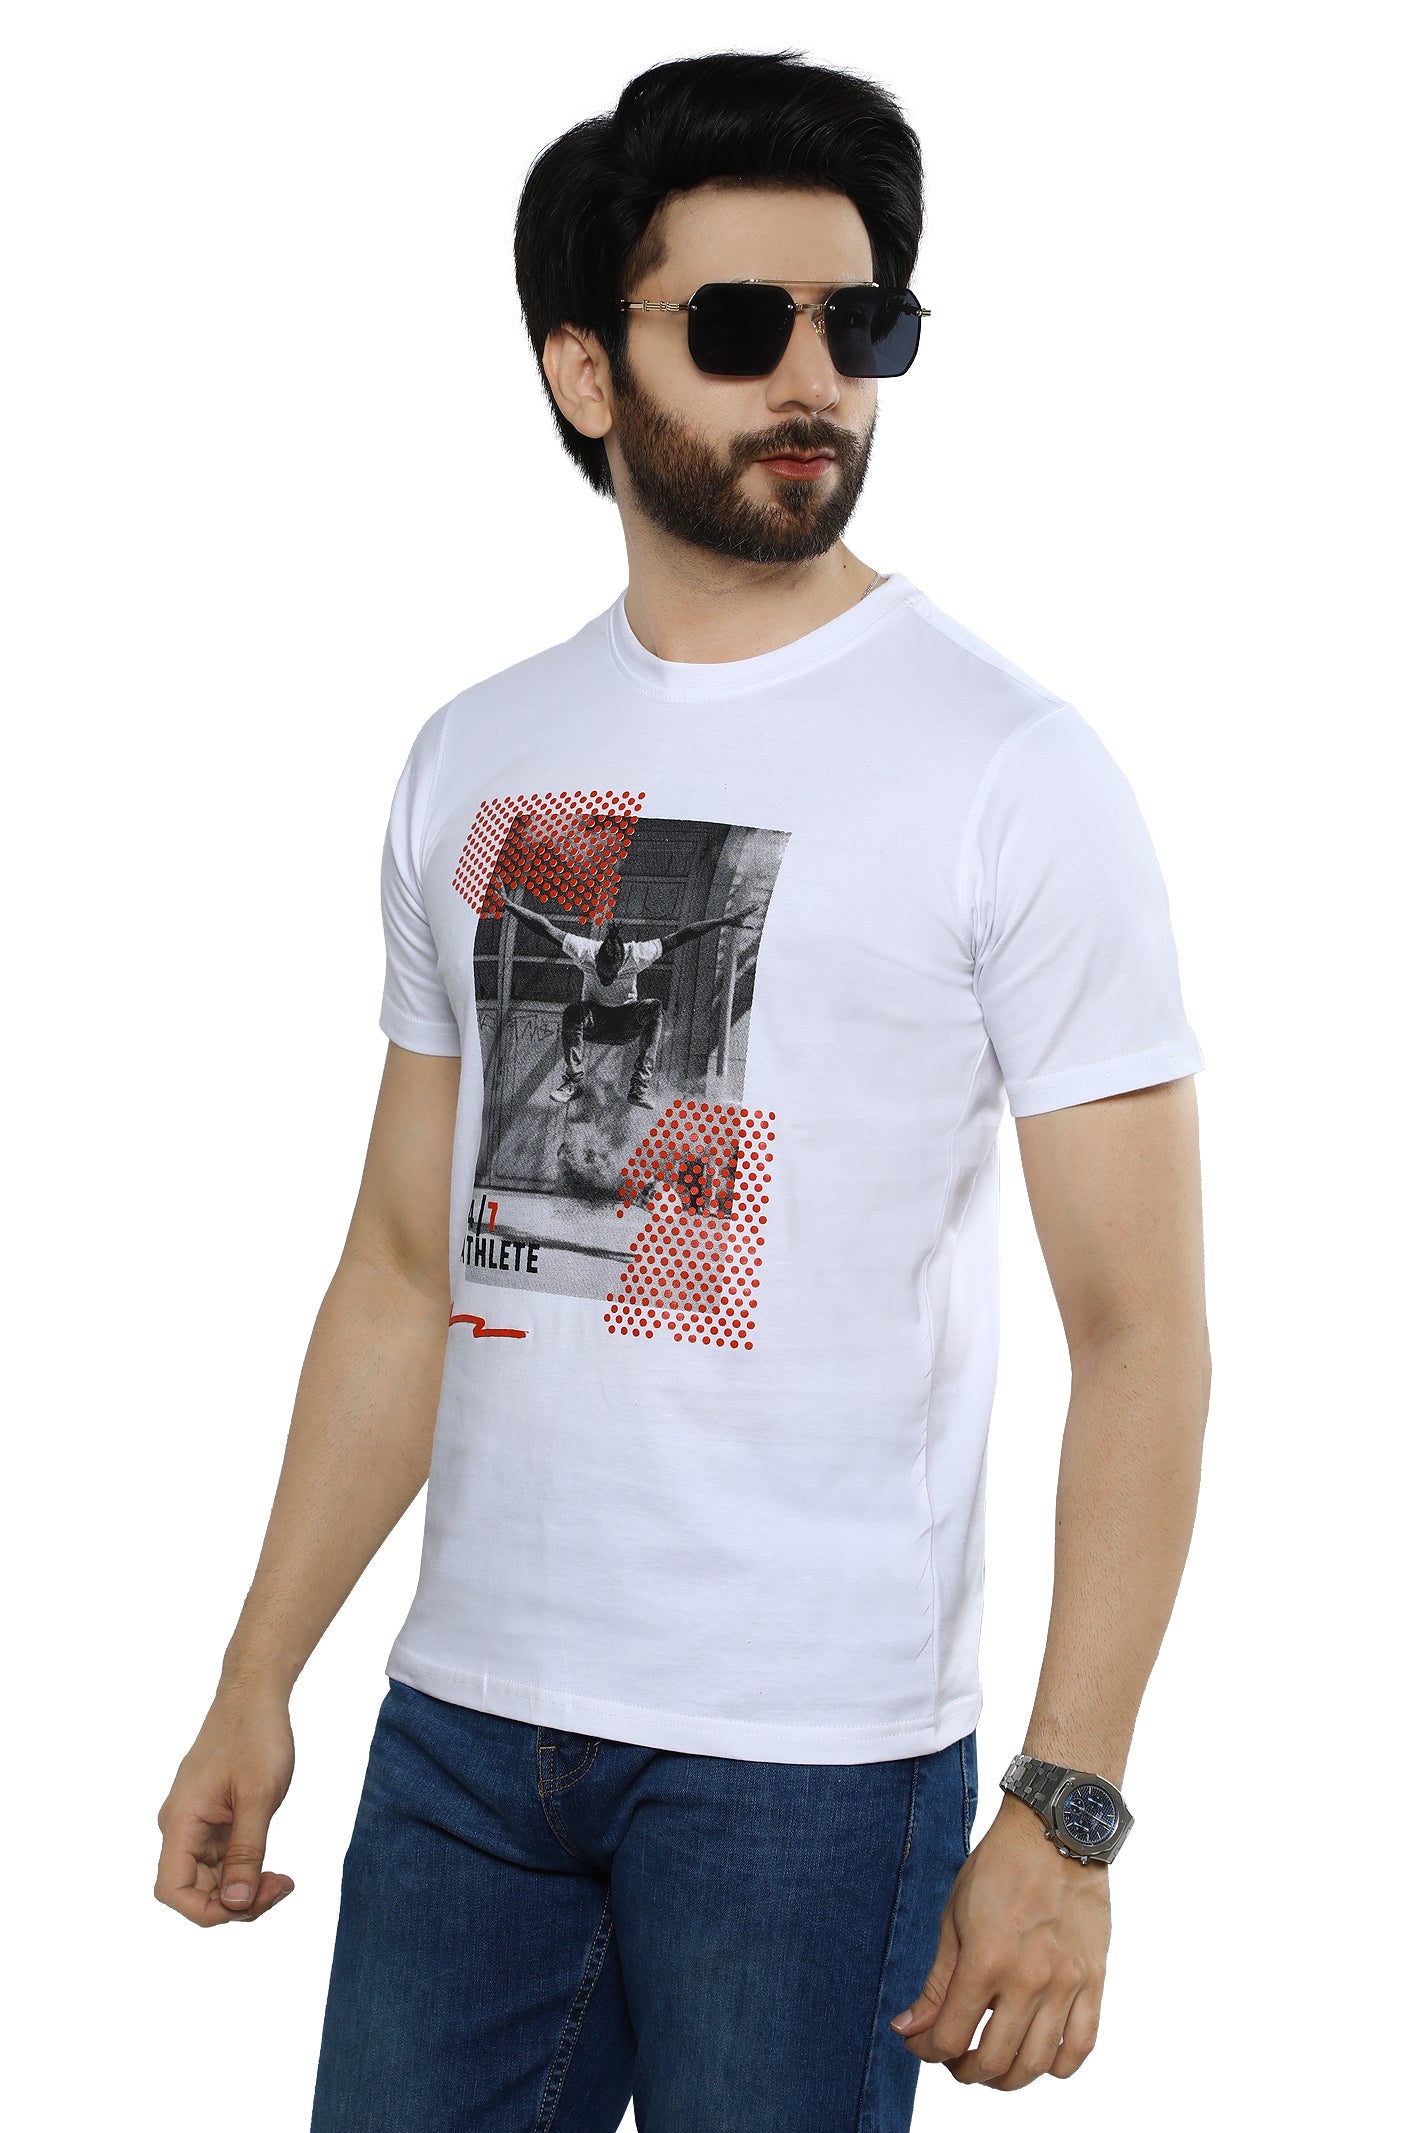 Diners Men's Round Neck T-Shirt SKU: NA870-WHITE - Diners